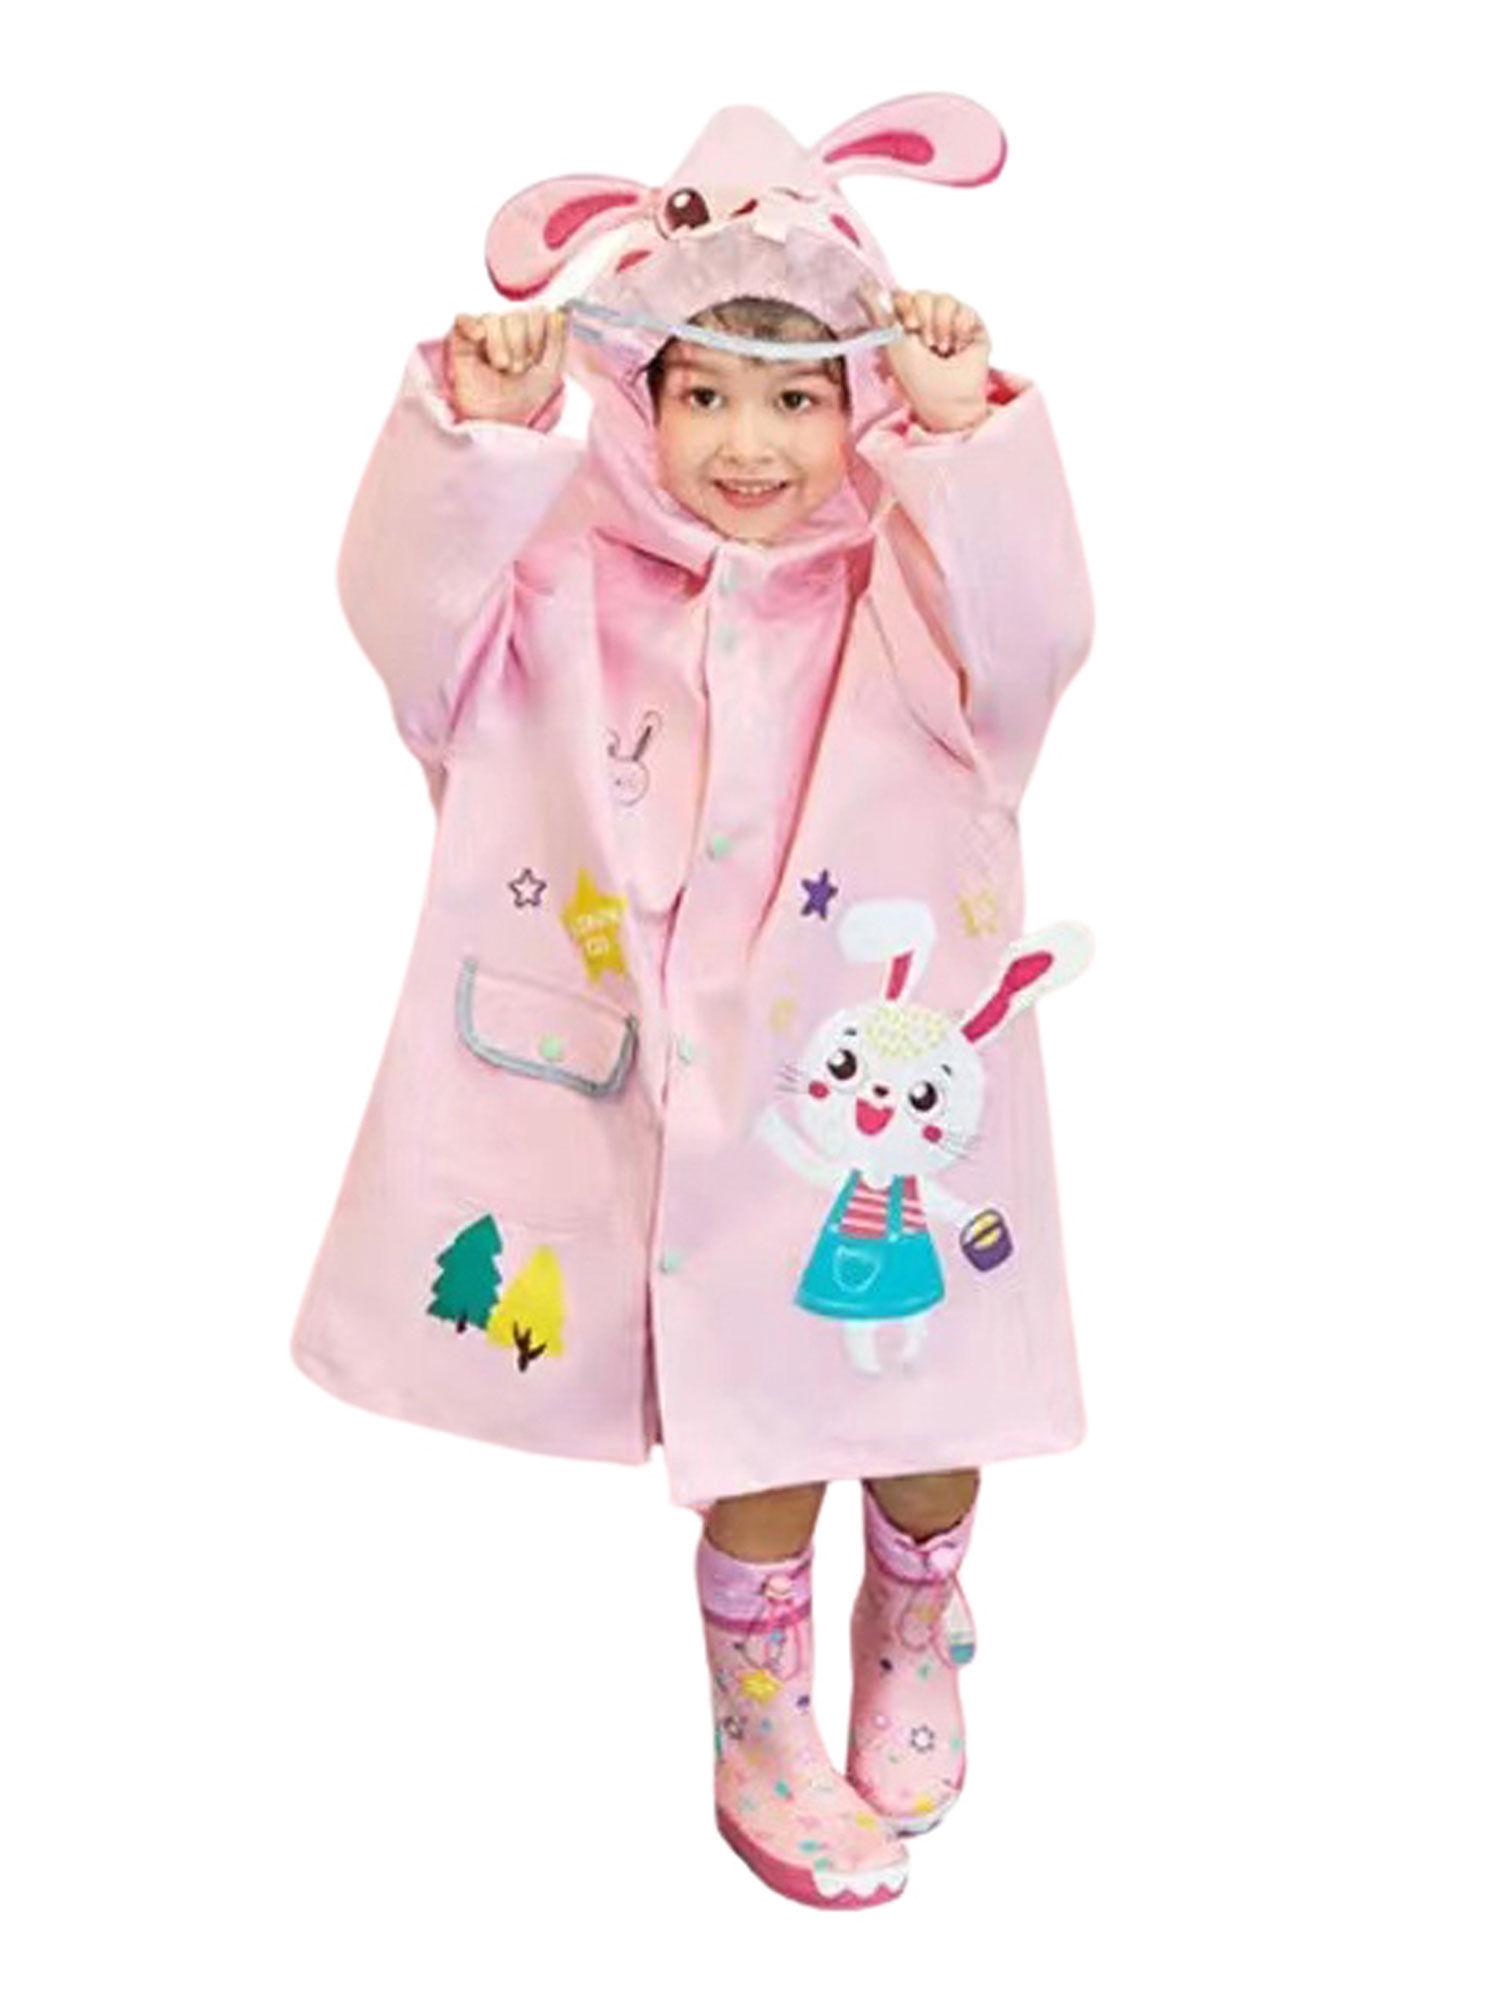 all over raincoat for kids mall baby pink rabbit theme